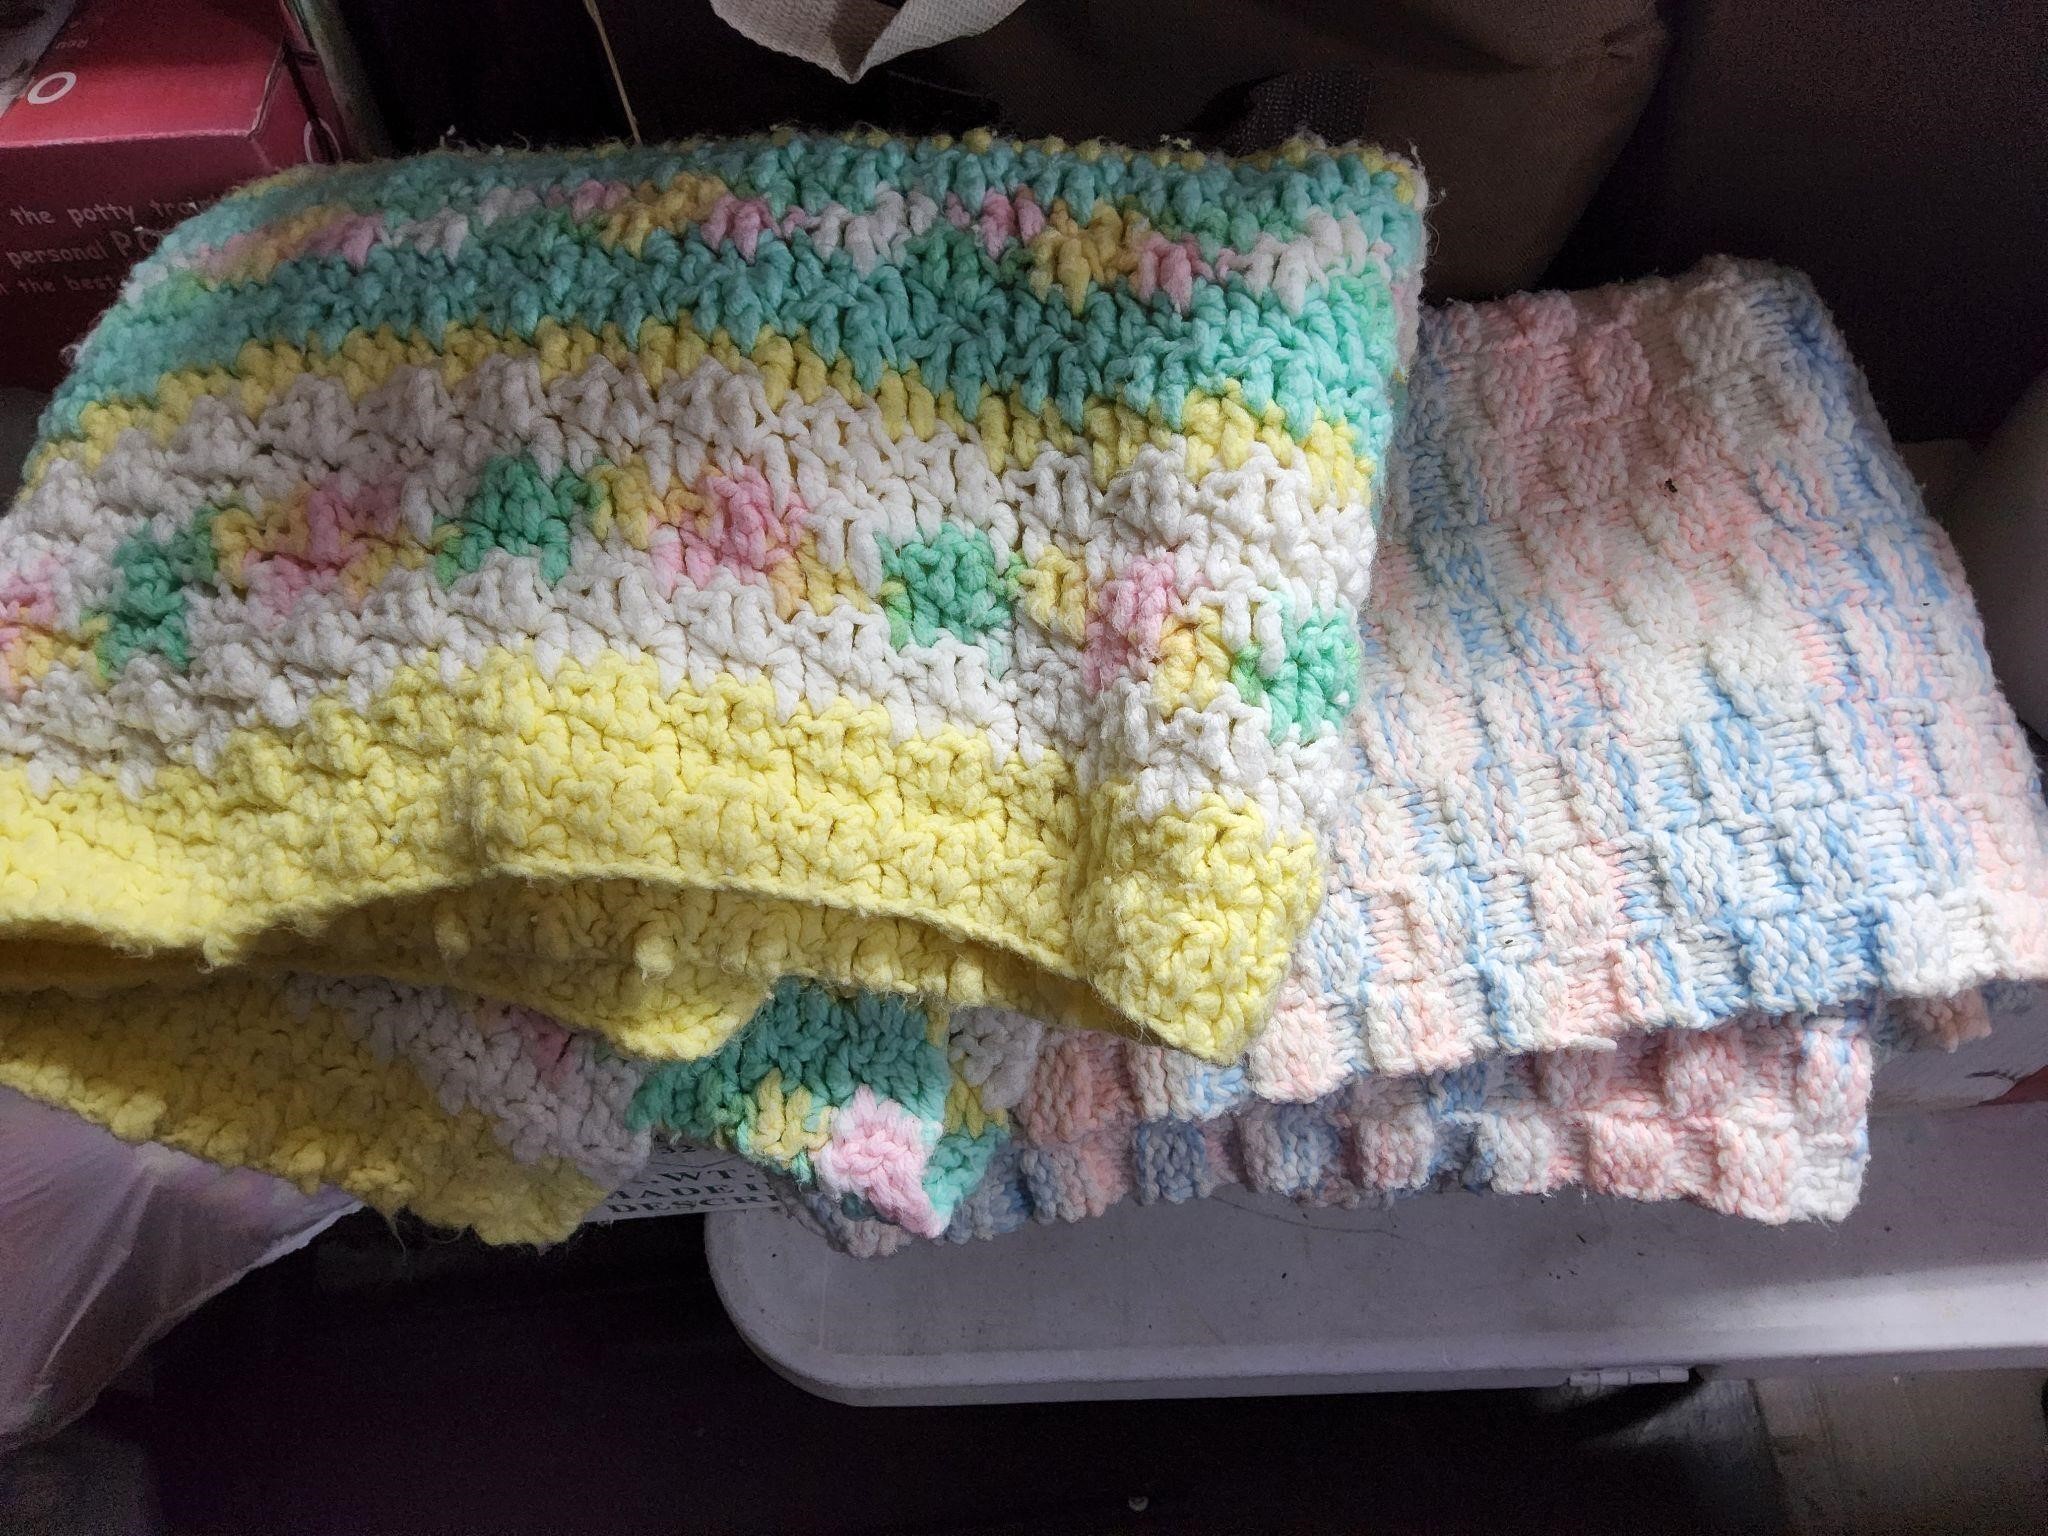 2 baby blankets